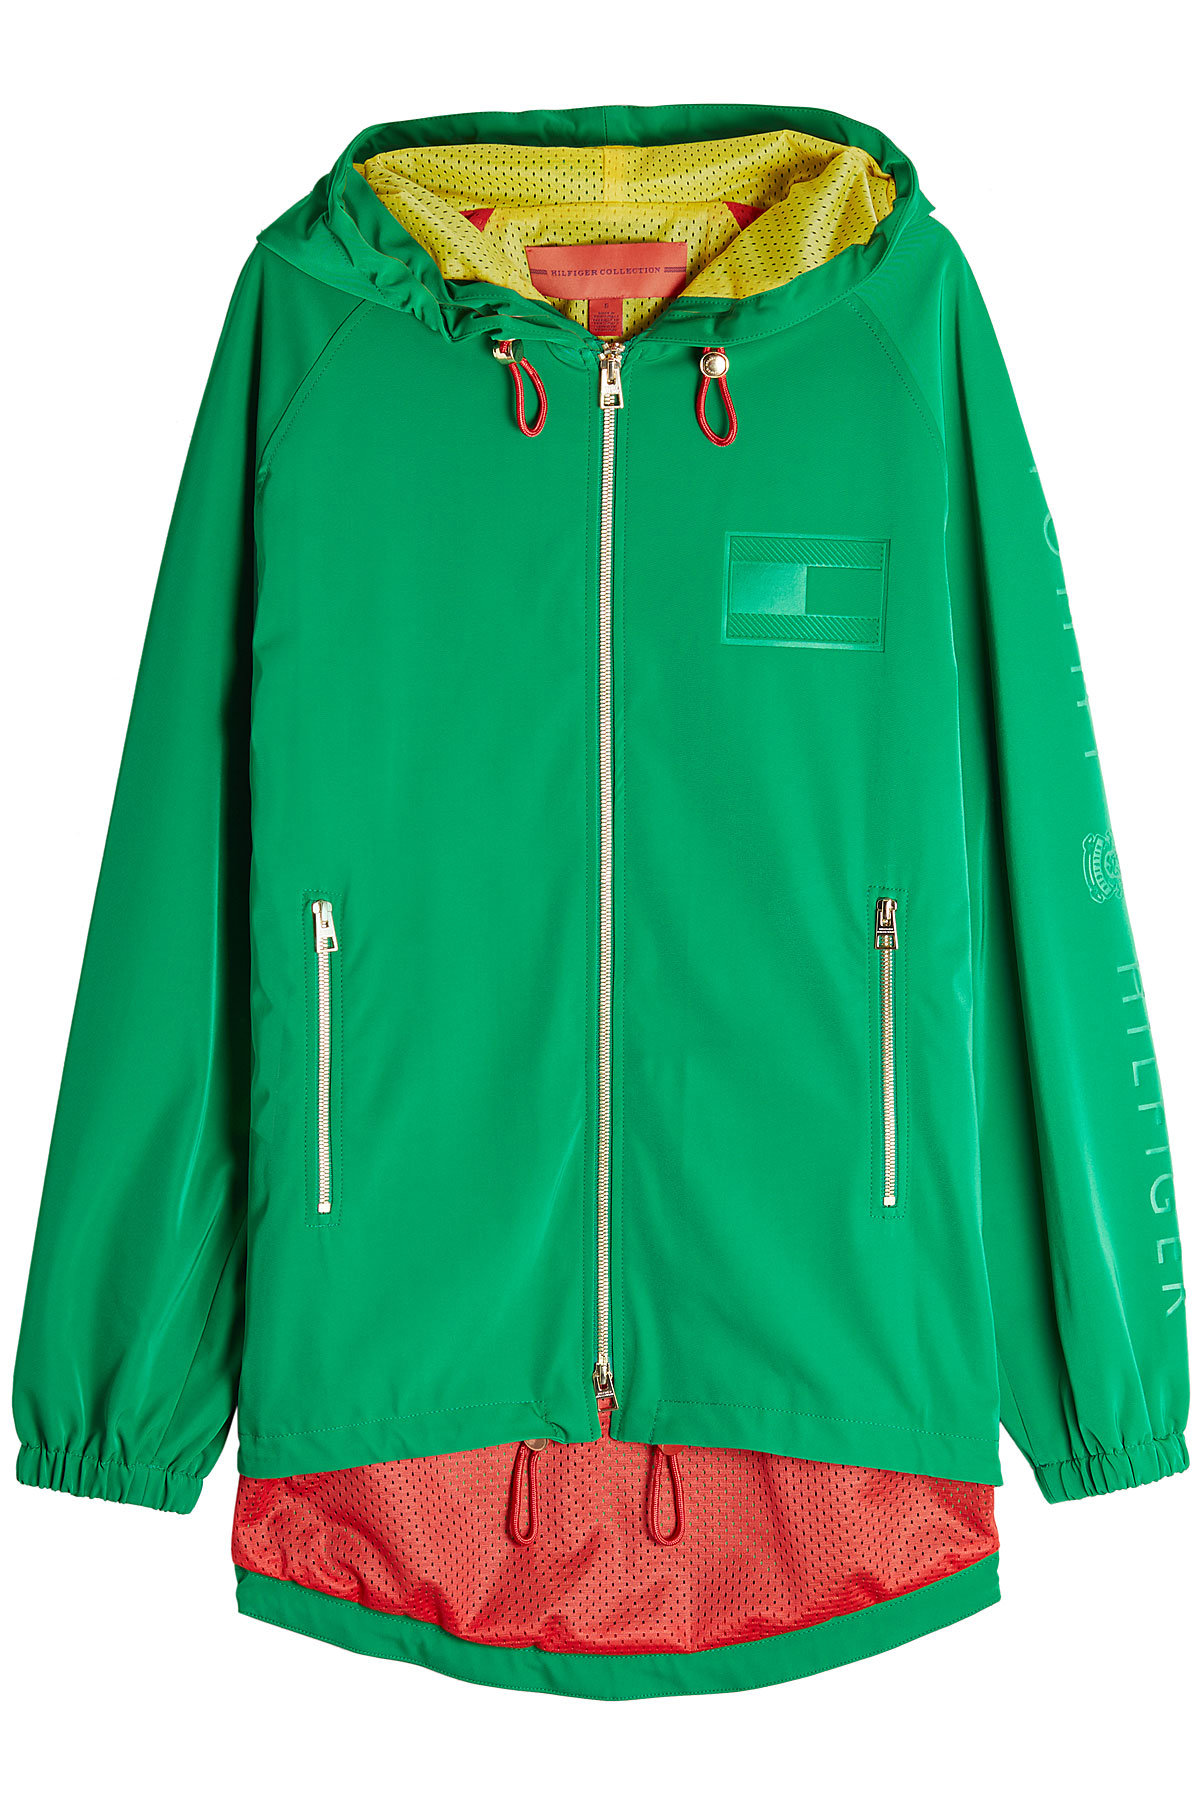 Hilfiger Collection - Crest Zipped Jacket with Hood